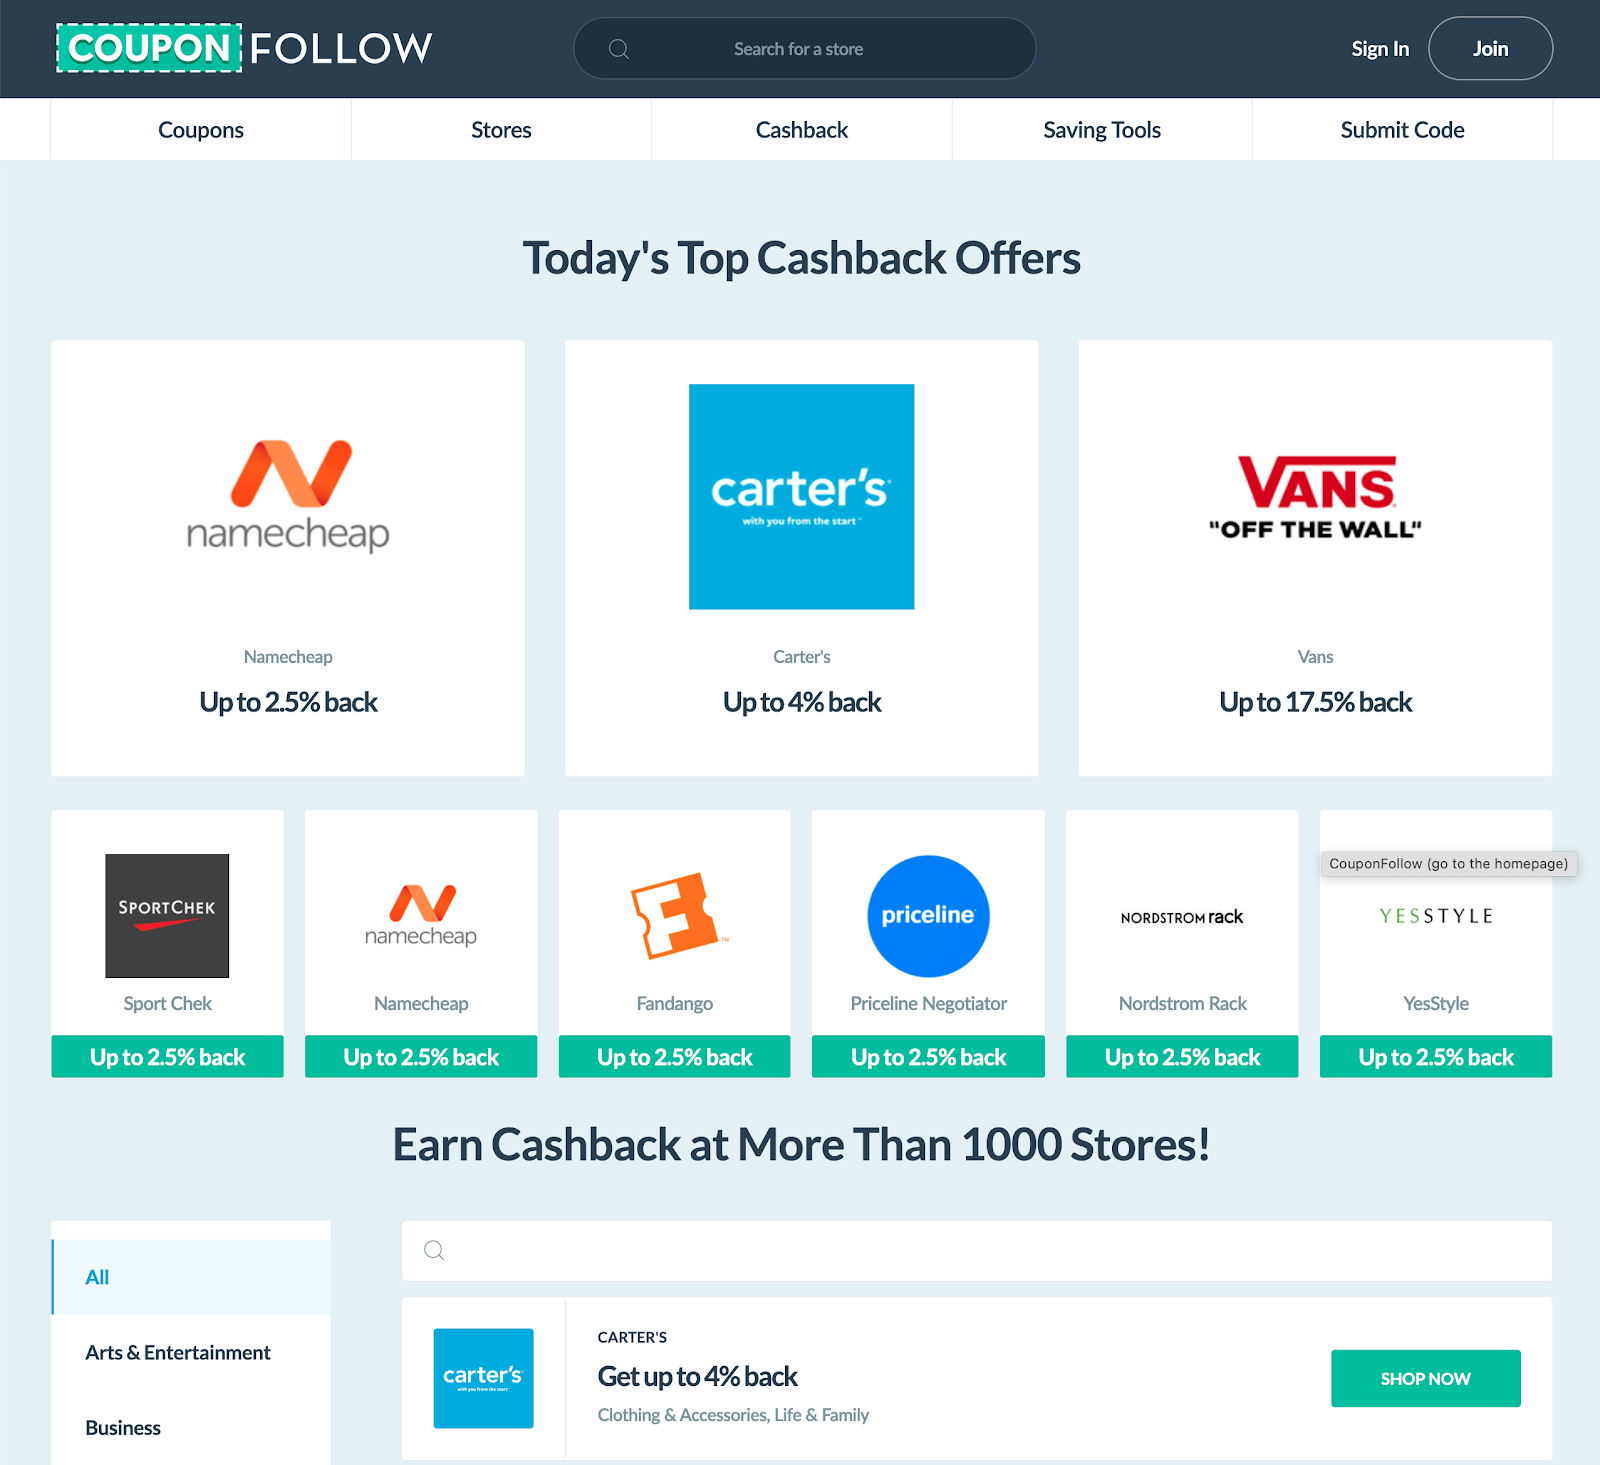 participating brands who offer cashback on CouponFollow
